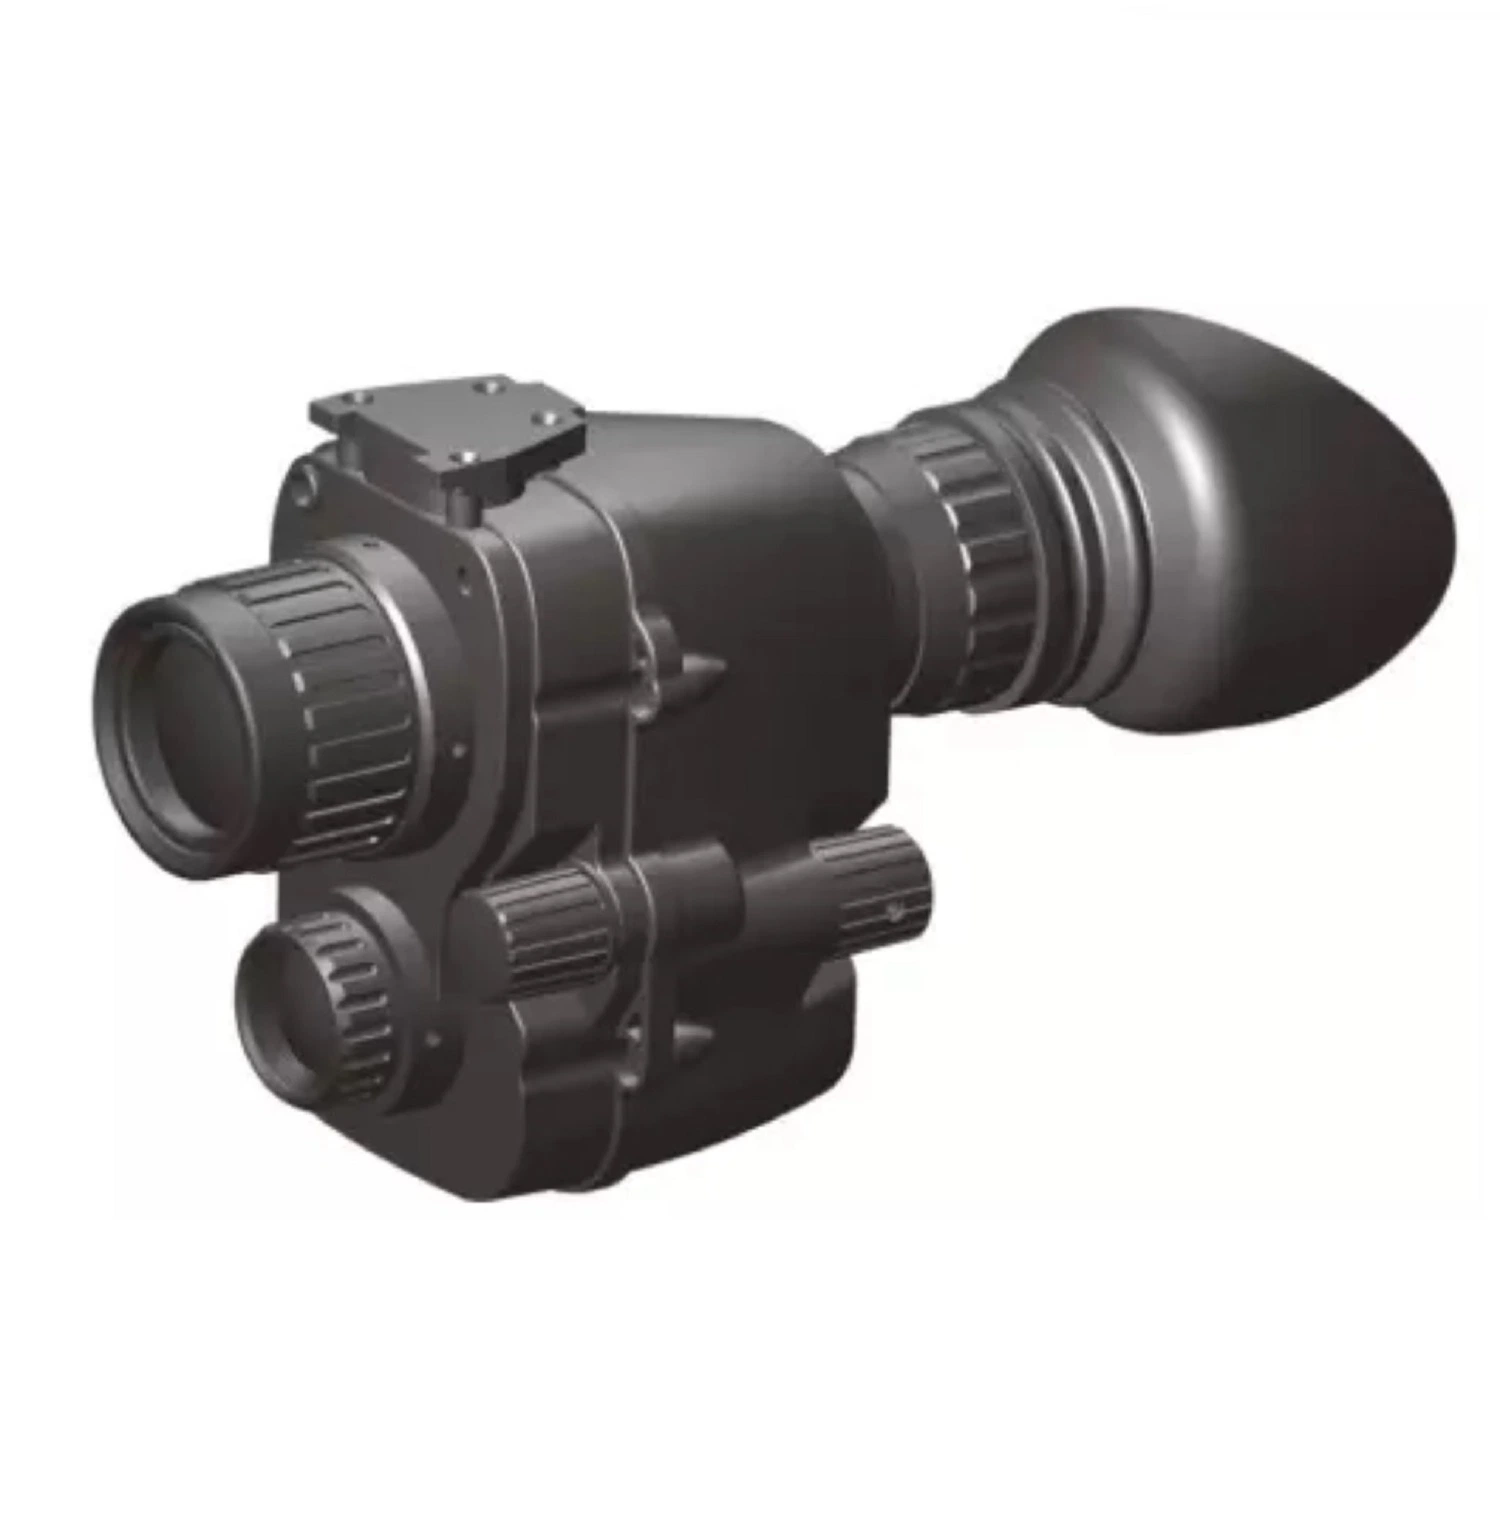 IR Thermal Imager/Low Light-Level Fused Night Vision Helmet Mounted Scope